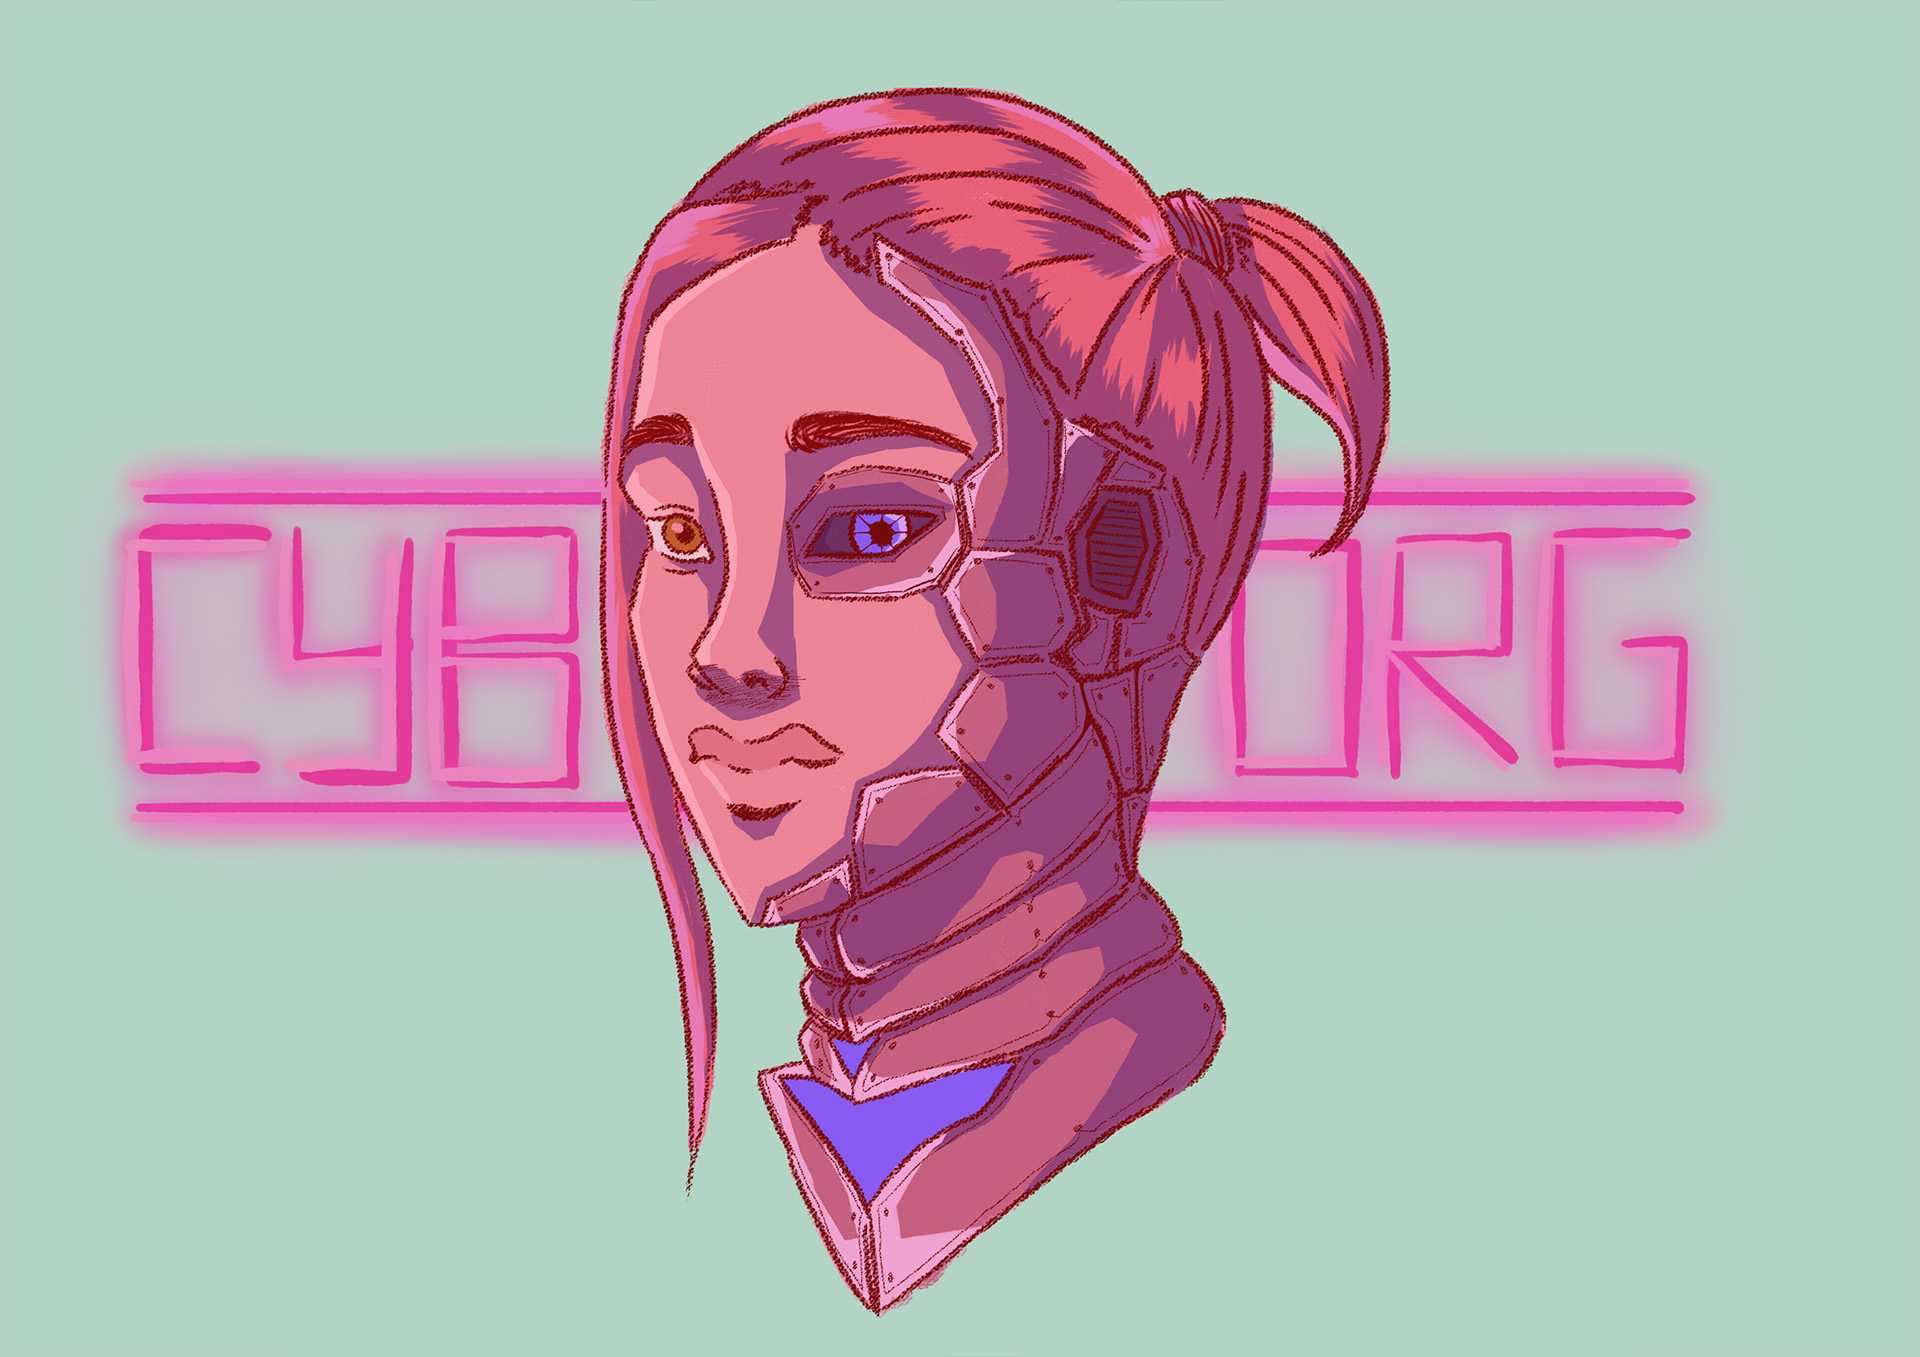 Redesigned card from the board game 'Codenames' in a cyberpunk theme. A card representing the cyborg team.